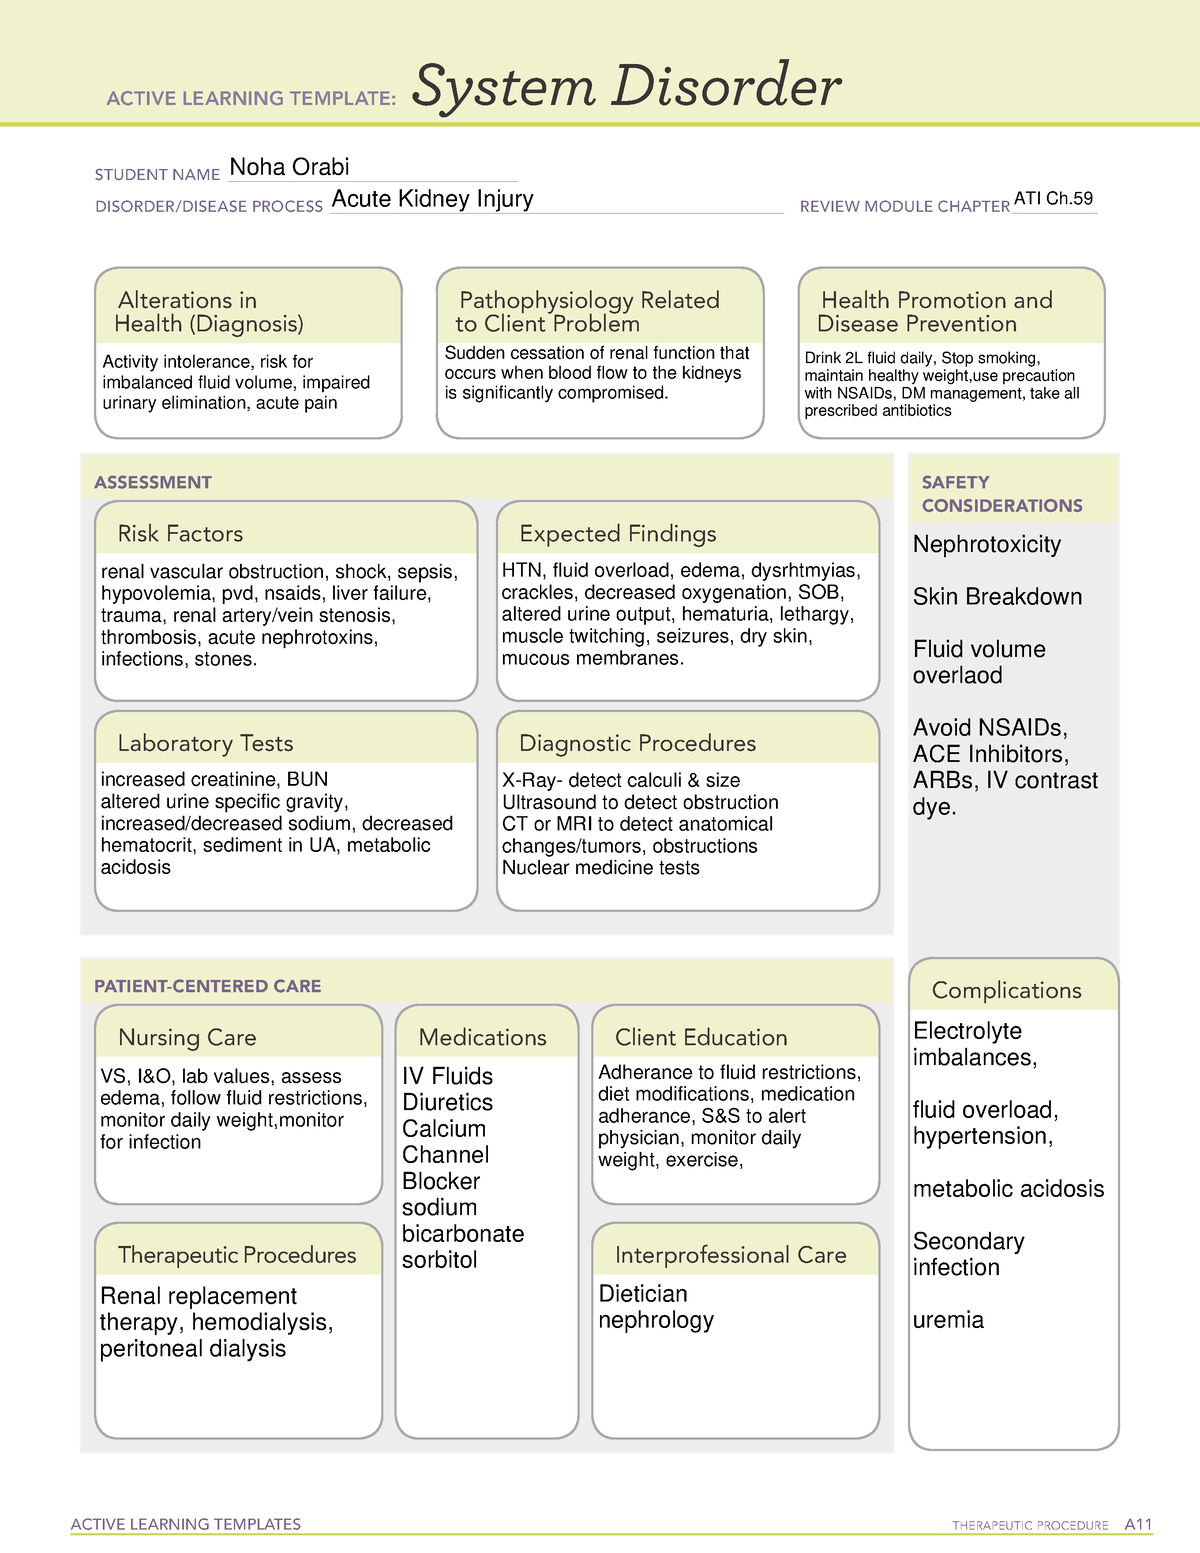 Acute Kidney Injury Template ACTIVE LEARNING TEMPLATES THERAPEUTIC